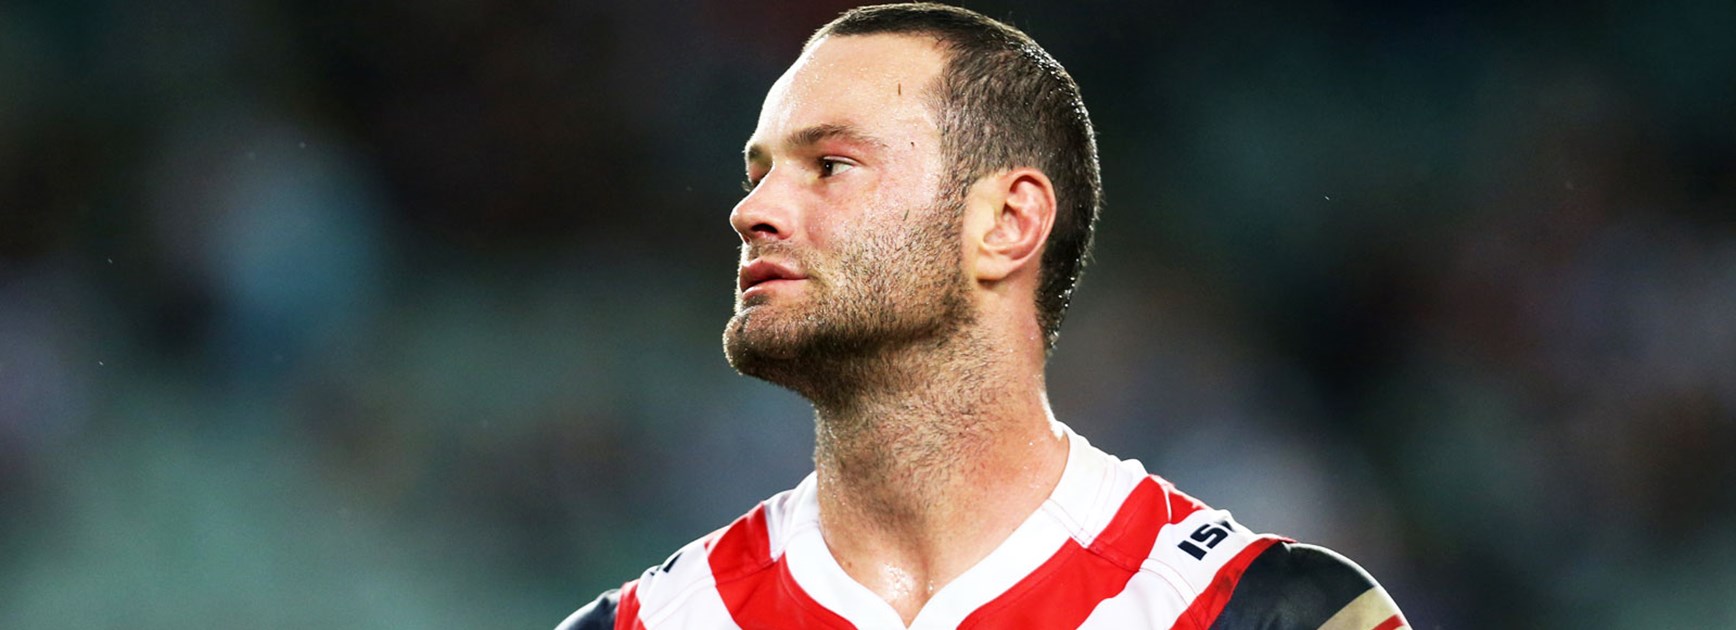 Boyd Cordner is relishing his new role as Roosters co-captain.